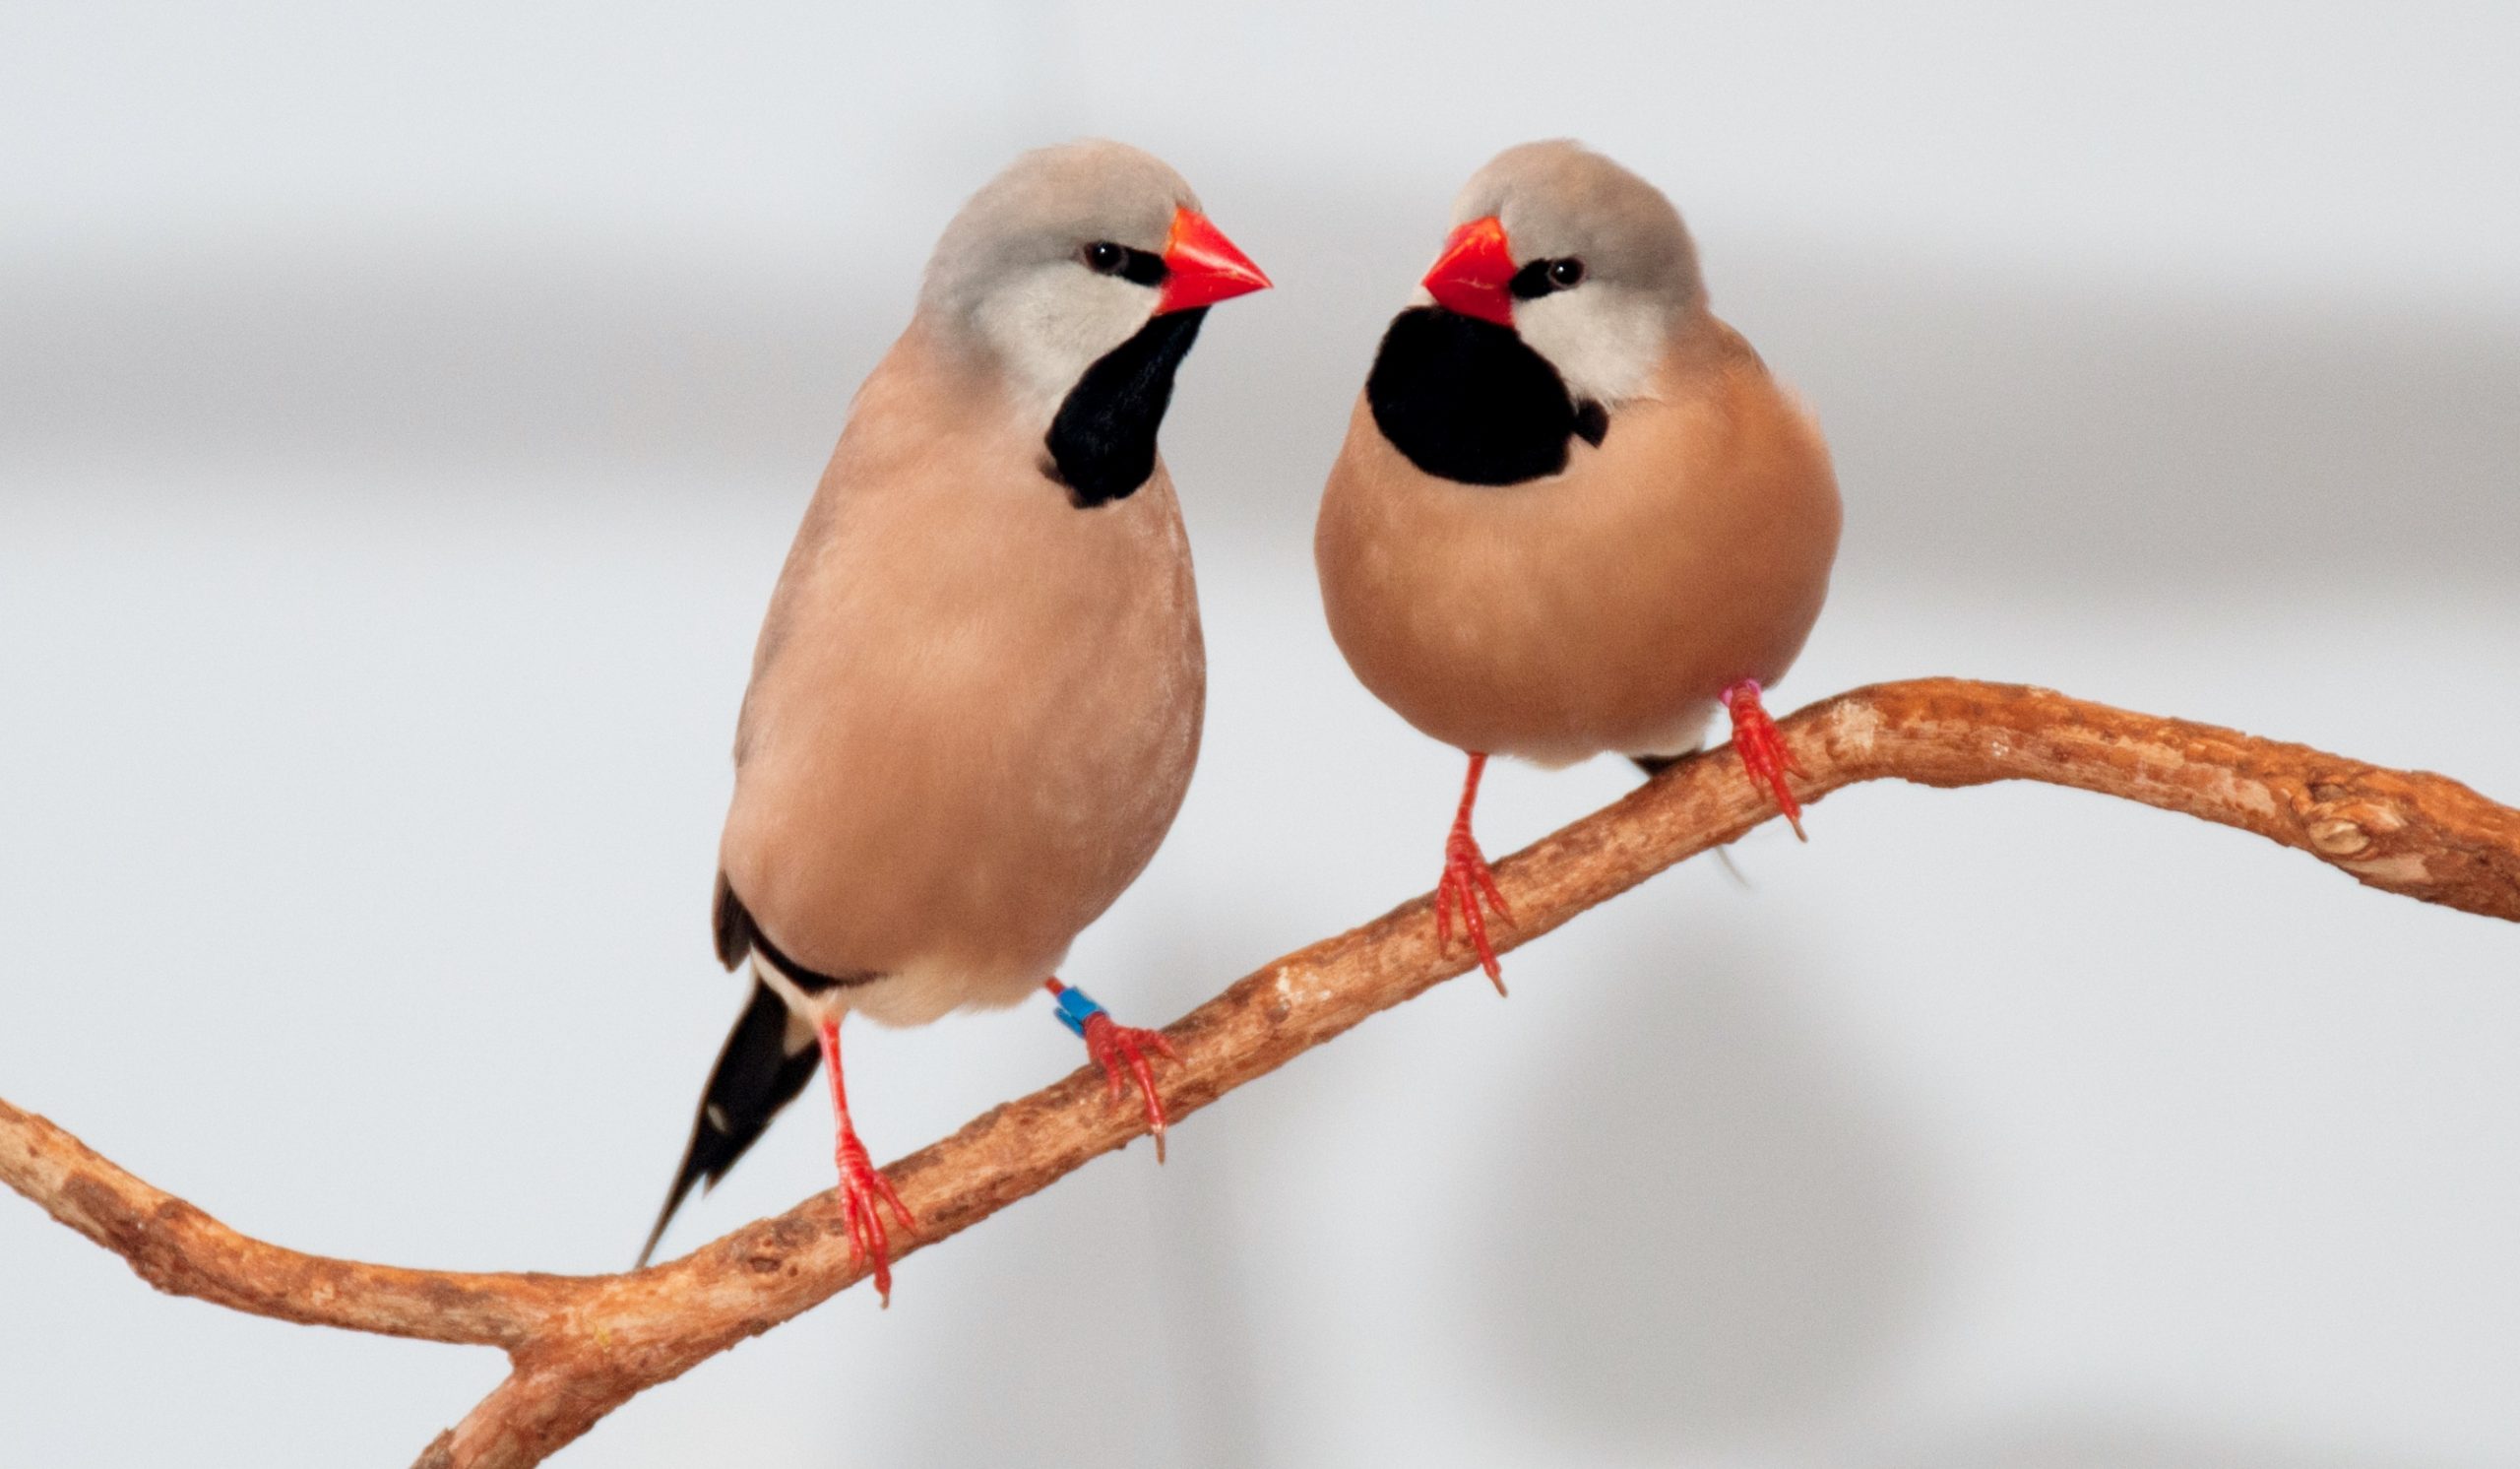 Two Shaft-tailed Finches perched on a branch